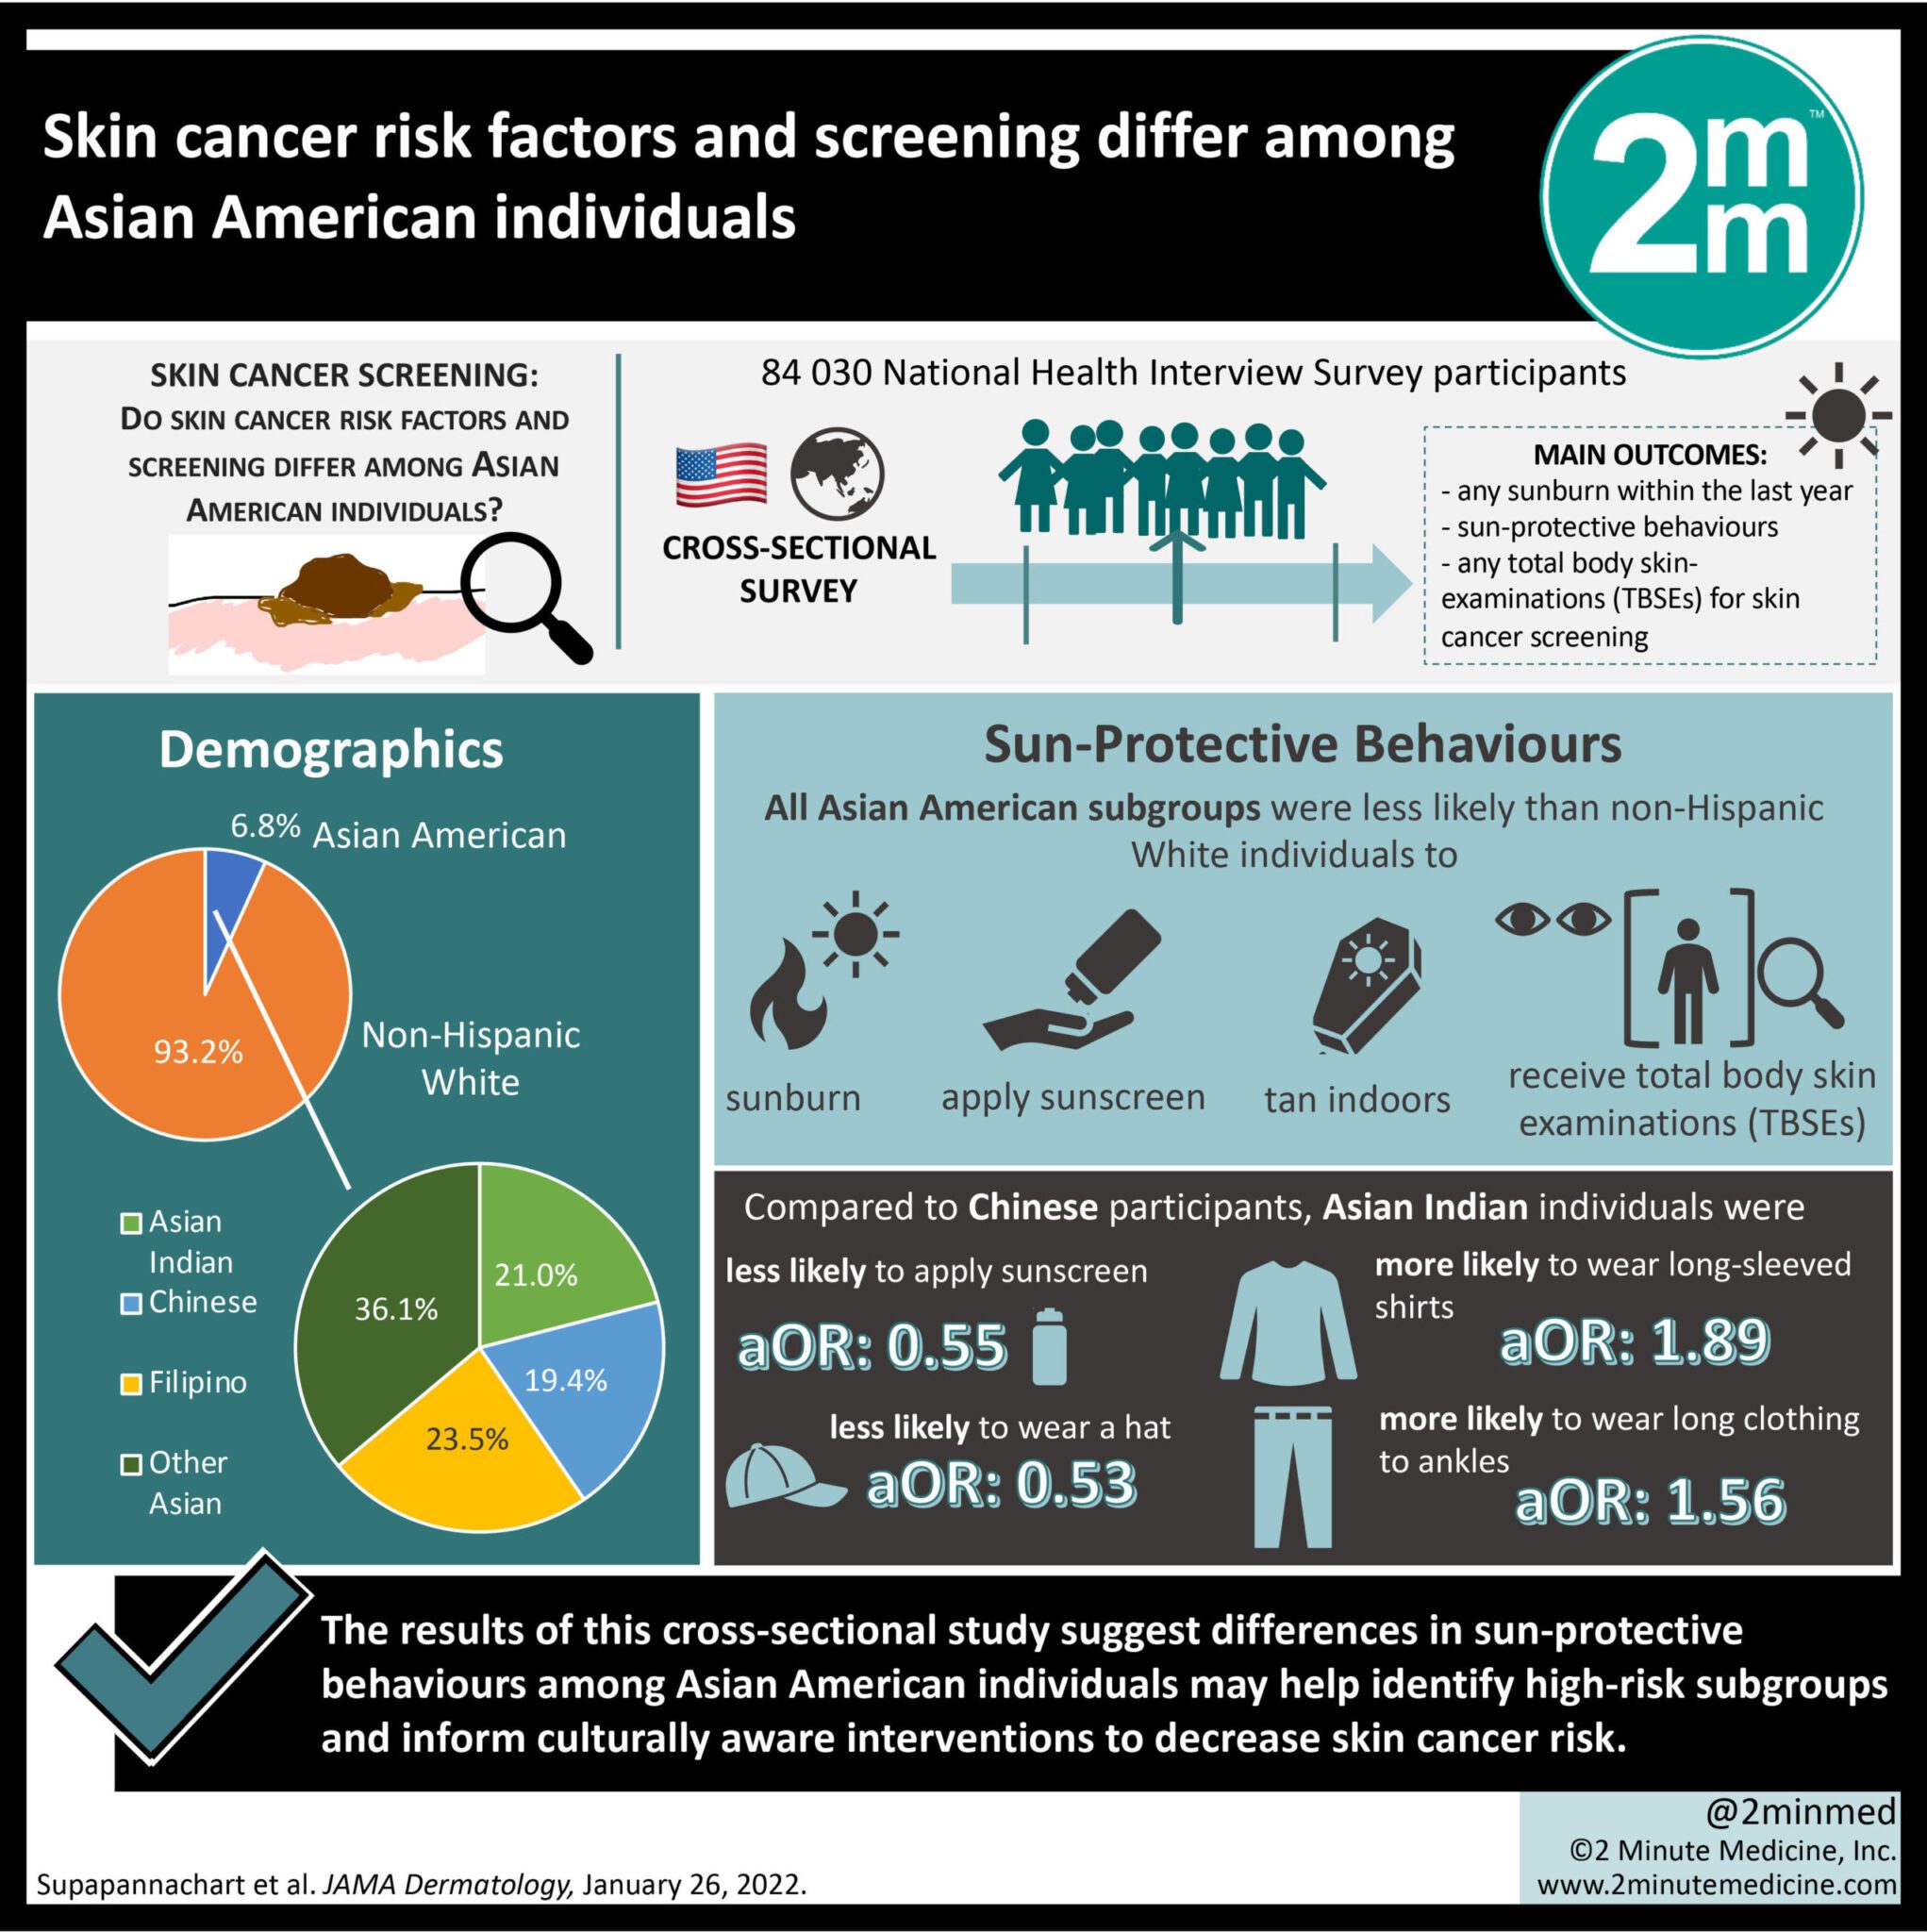 #VisualAbstract: Skin cancer risk factors and screening differ among Asian American individuals